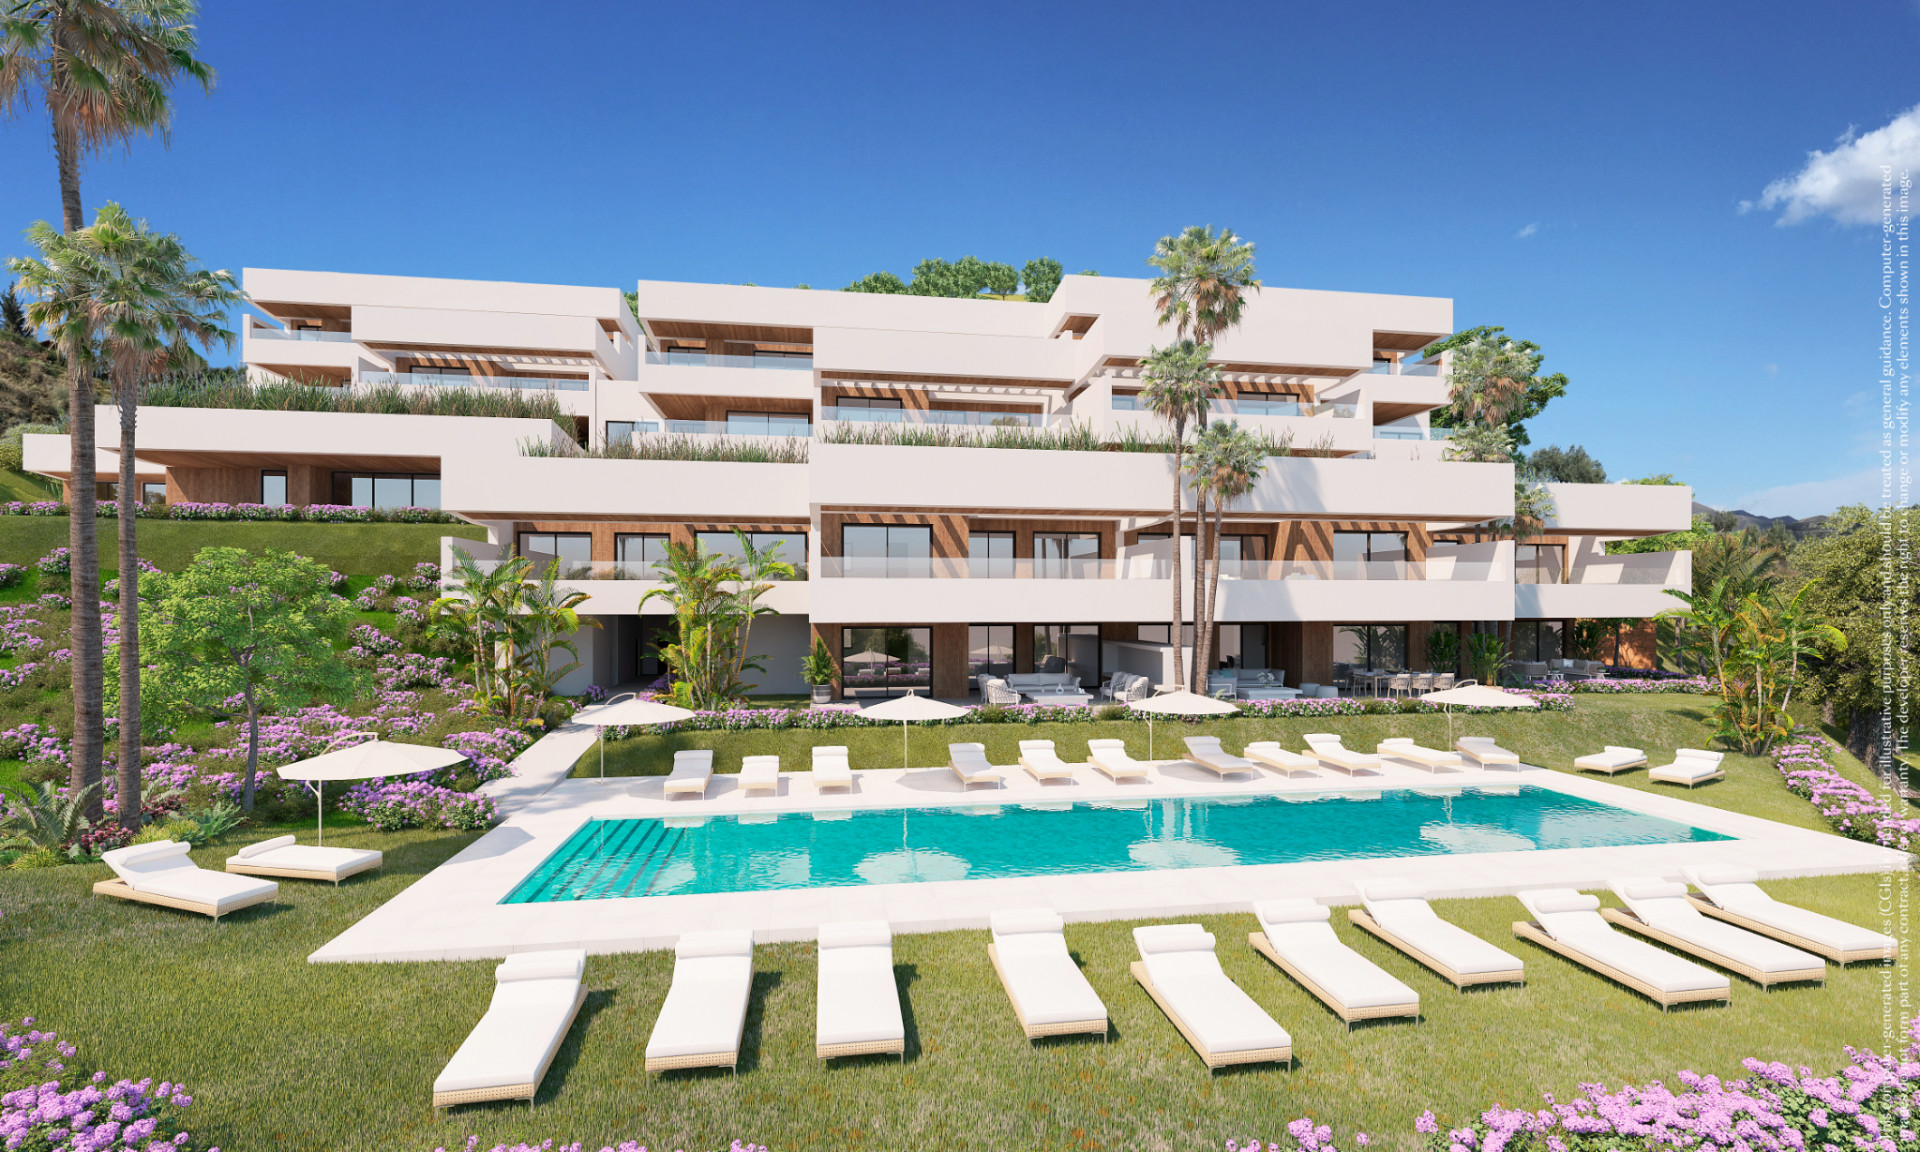 Olivos: Residential development of 22 flats and penthouses located in Palo Alto, Ojen.